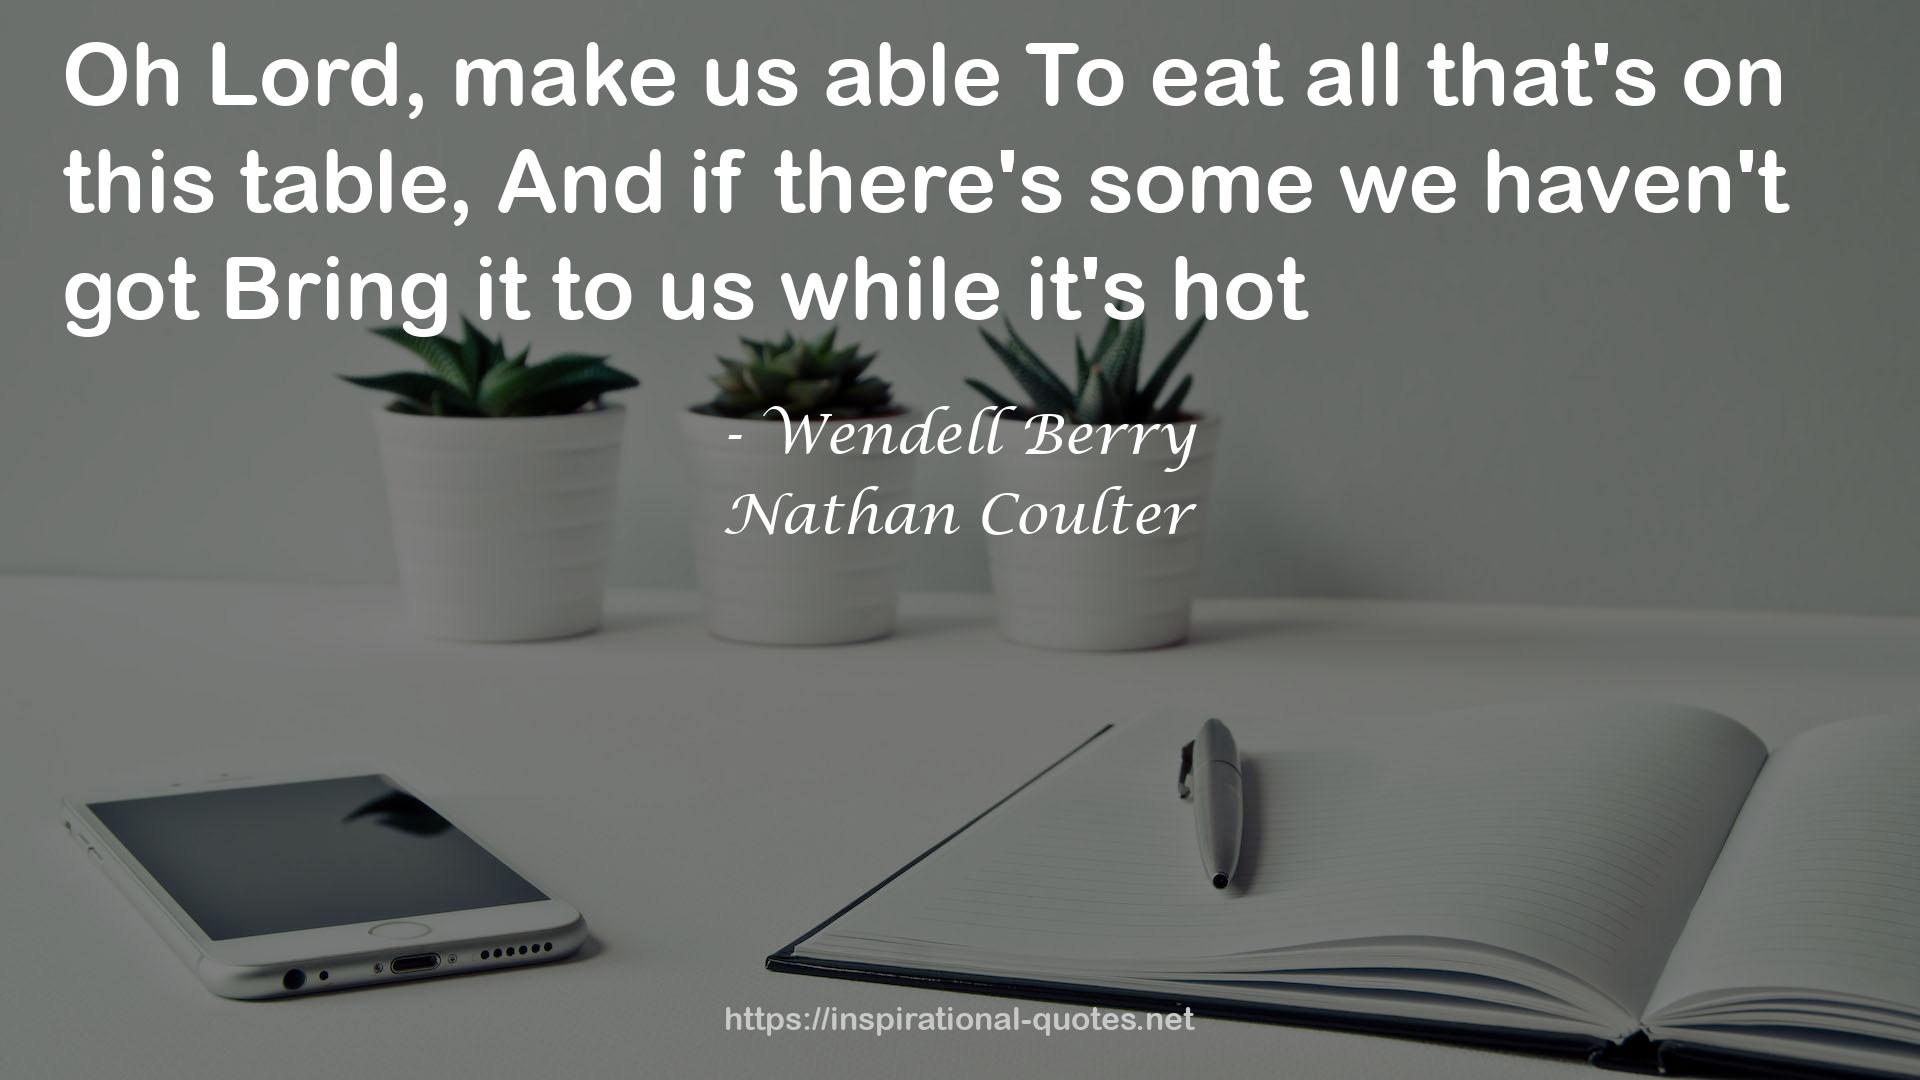 Nathan Coulter QUOTES